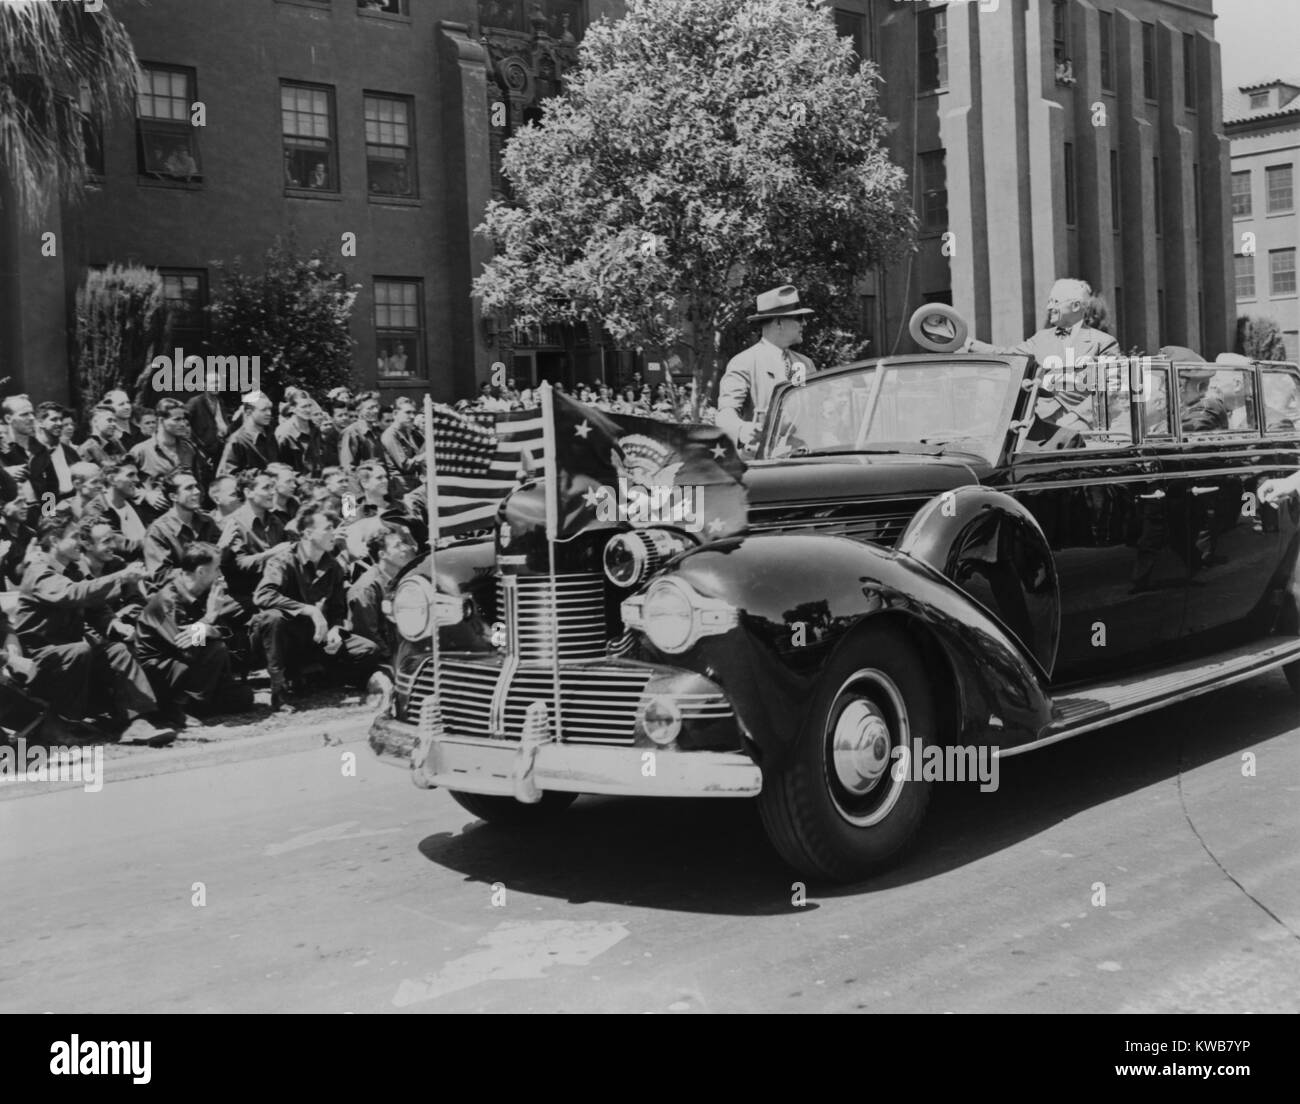 President Harry Truman waving to soldiers wounded in Pacific combat. His limousine passes the lawn at the Hamilton Field Hospital near San Rafael, California. Truman was in San Francisco attending the United Nations Charter signing ceremonies. April 26, 1945. World War 2. (BSLOC 2014 8 197) Stock Photo